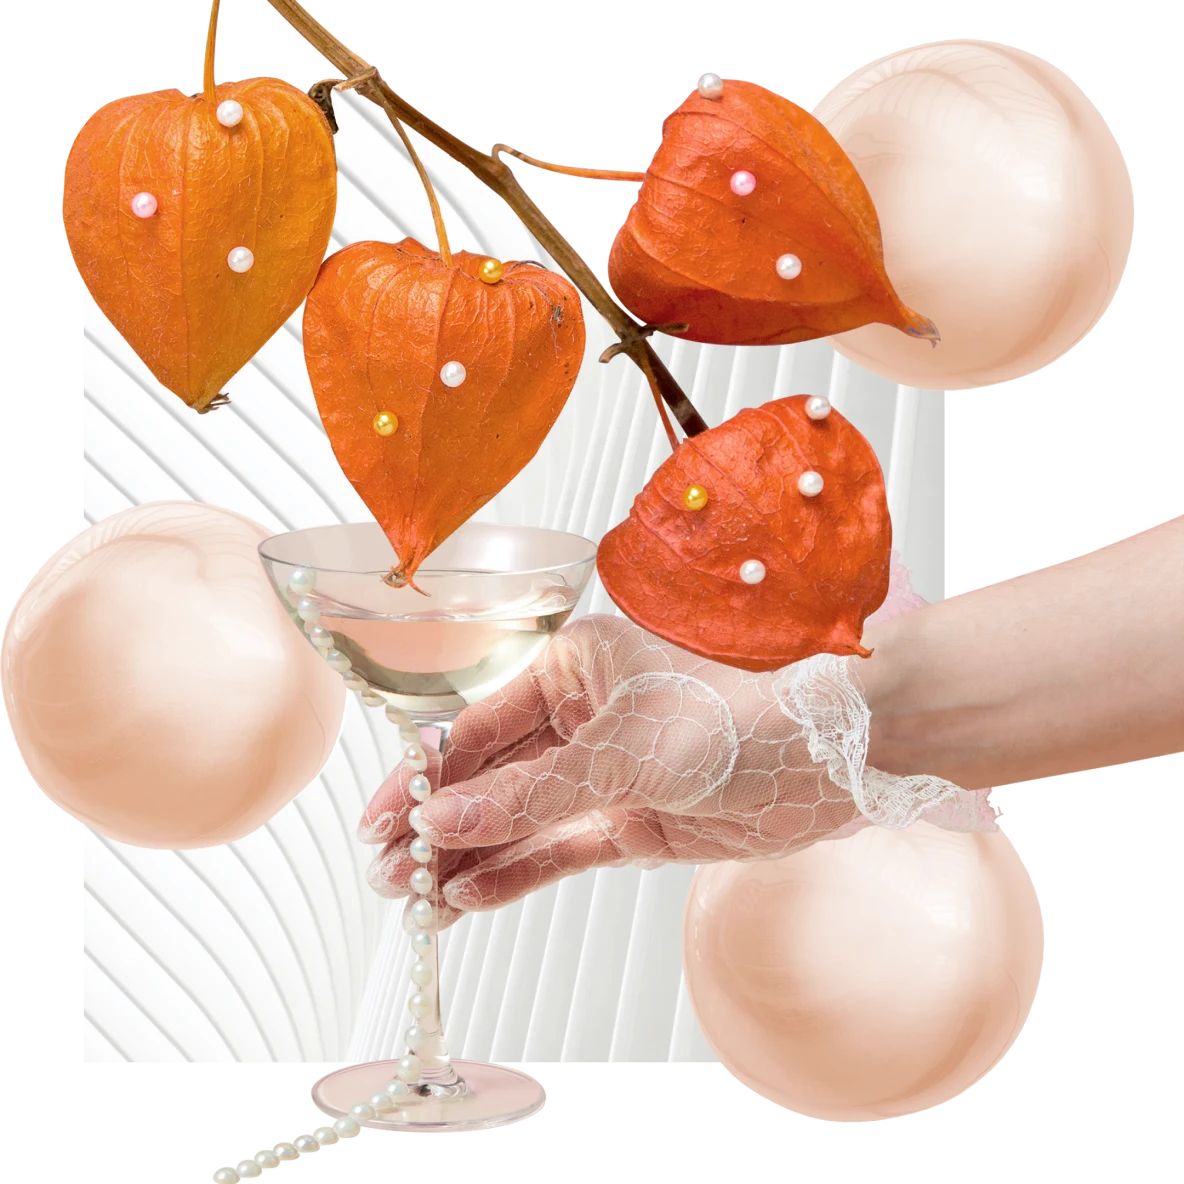 Four orange physalis pods studded with pearls, are on a thin branch, hanging down from the top. In the background, are three translucent orange pearls and a martini glass with a string of pearls on it, held by a hand wearing a lace glove.
